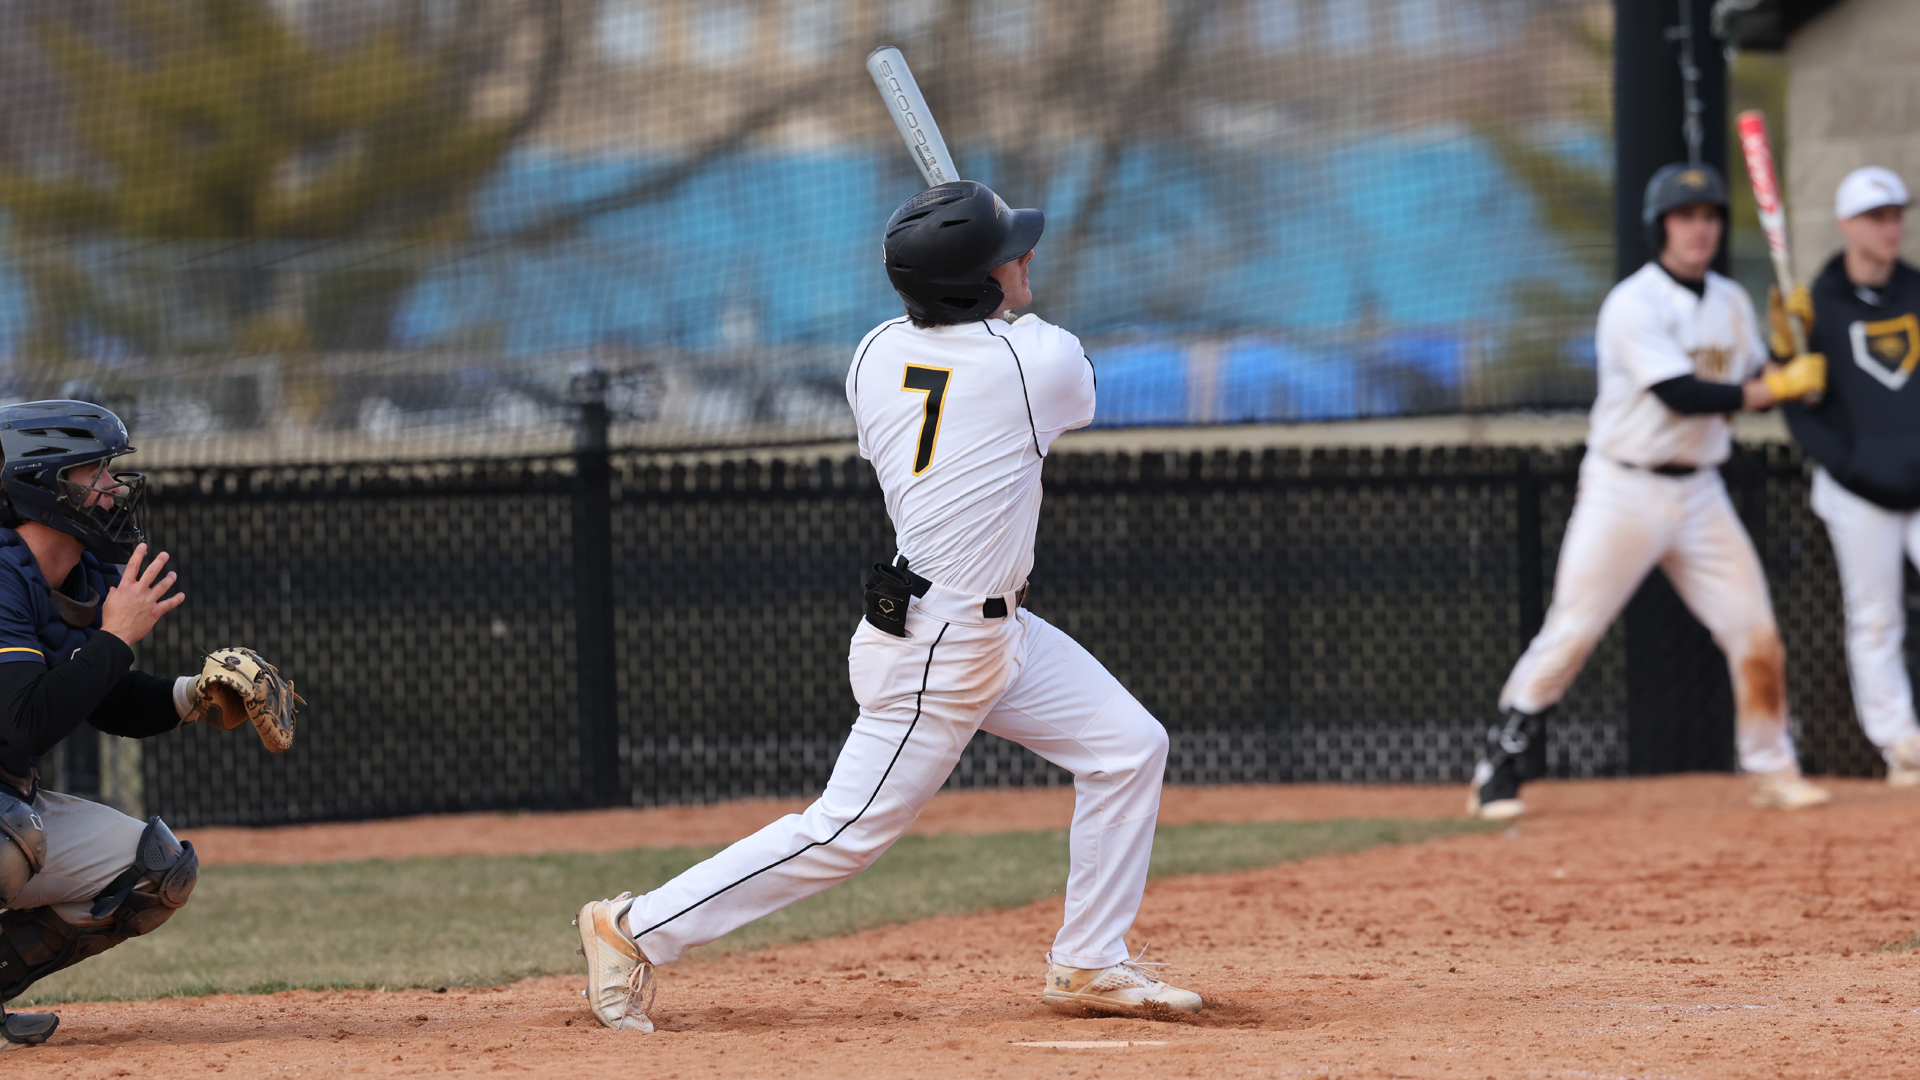 Jake Surane hit the three-run walk-off home run to cap off the Titans' sweep of Eau Claire on Friday. Photo Credit: Steve Frommell, UW-Oshkosh Sports Information